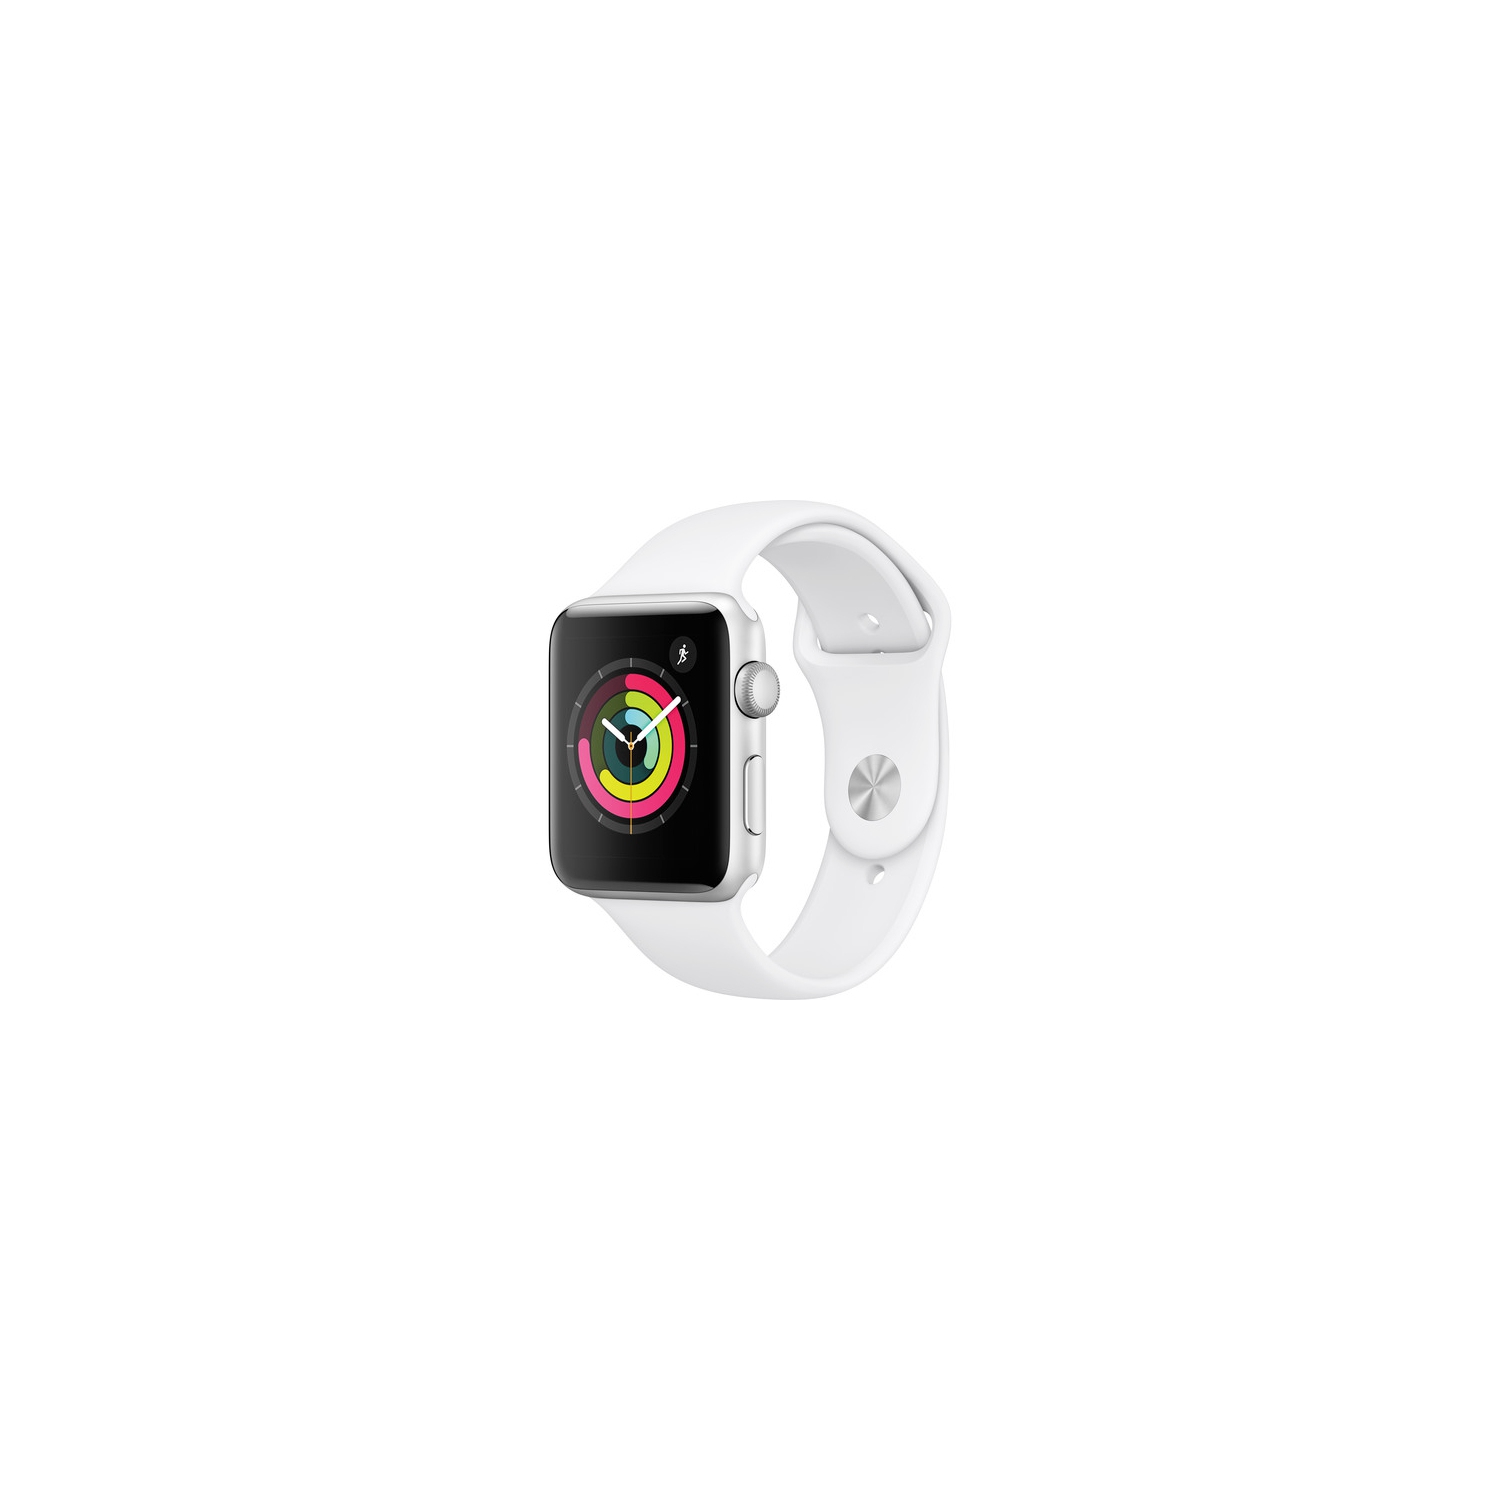 Refurbished (Good) - Apple Watch Series 3 42mm Smartwatch with GPS, Silver Aluminum Case, White Sport Band [Refurbished]